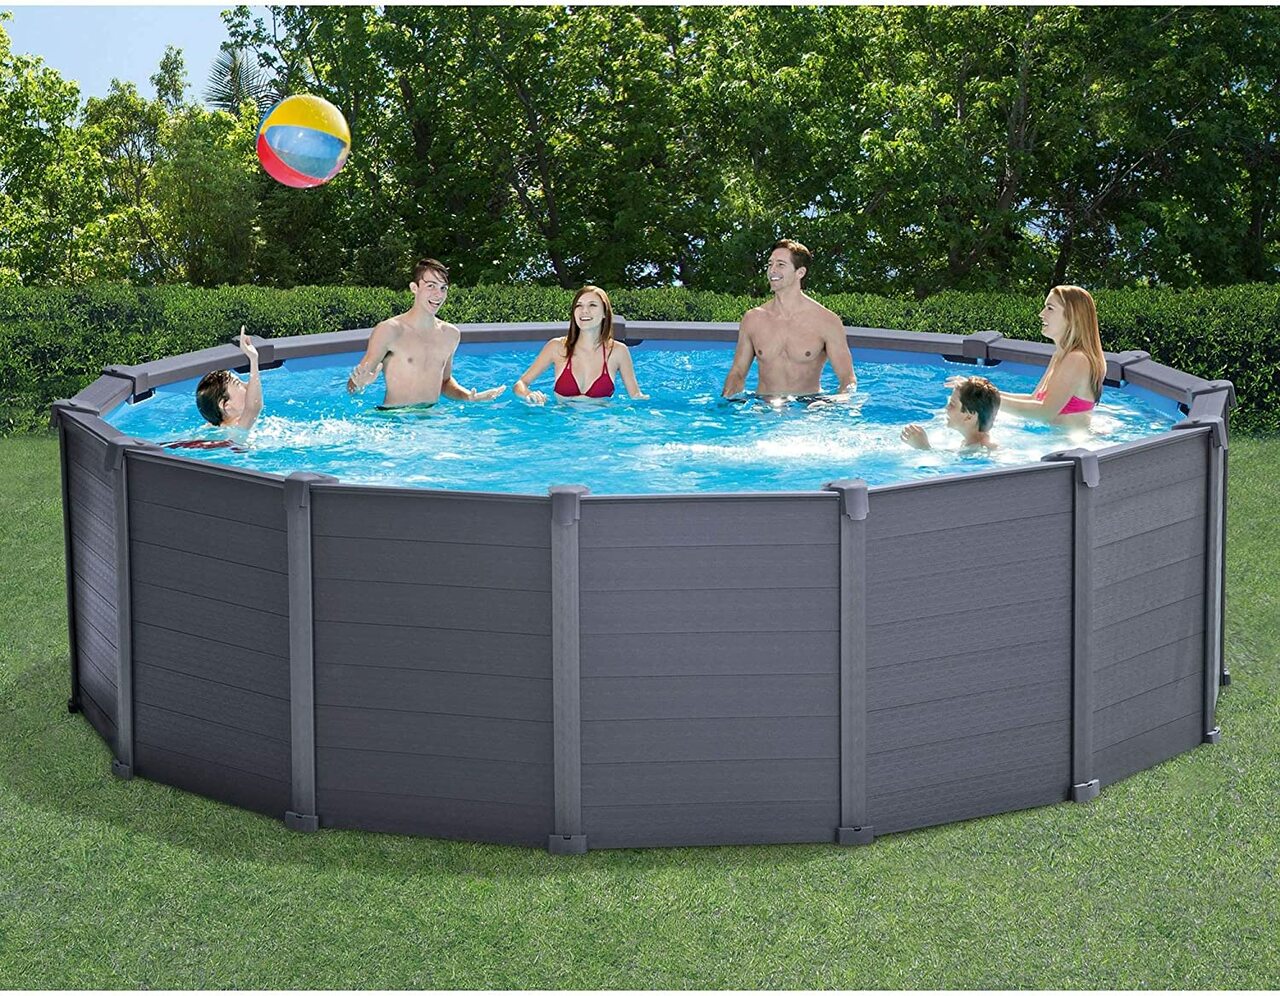 High-end panel wall pool brings incredible value and sophistication to your backyard